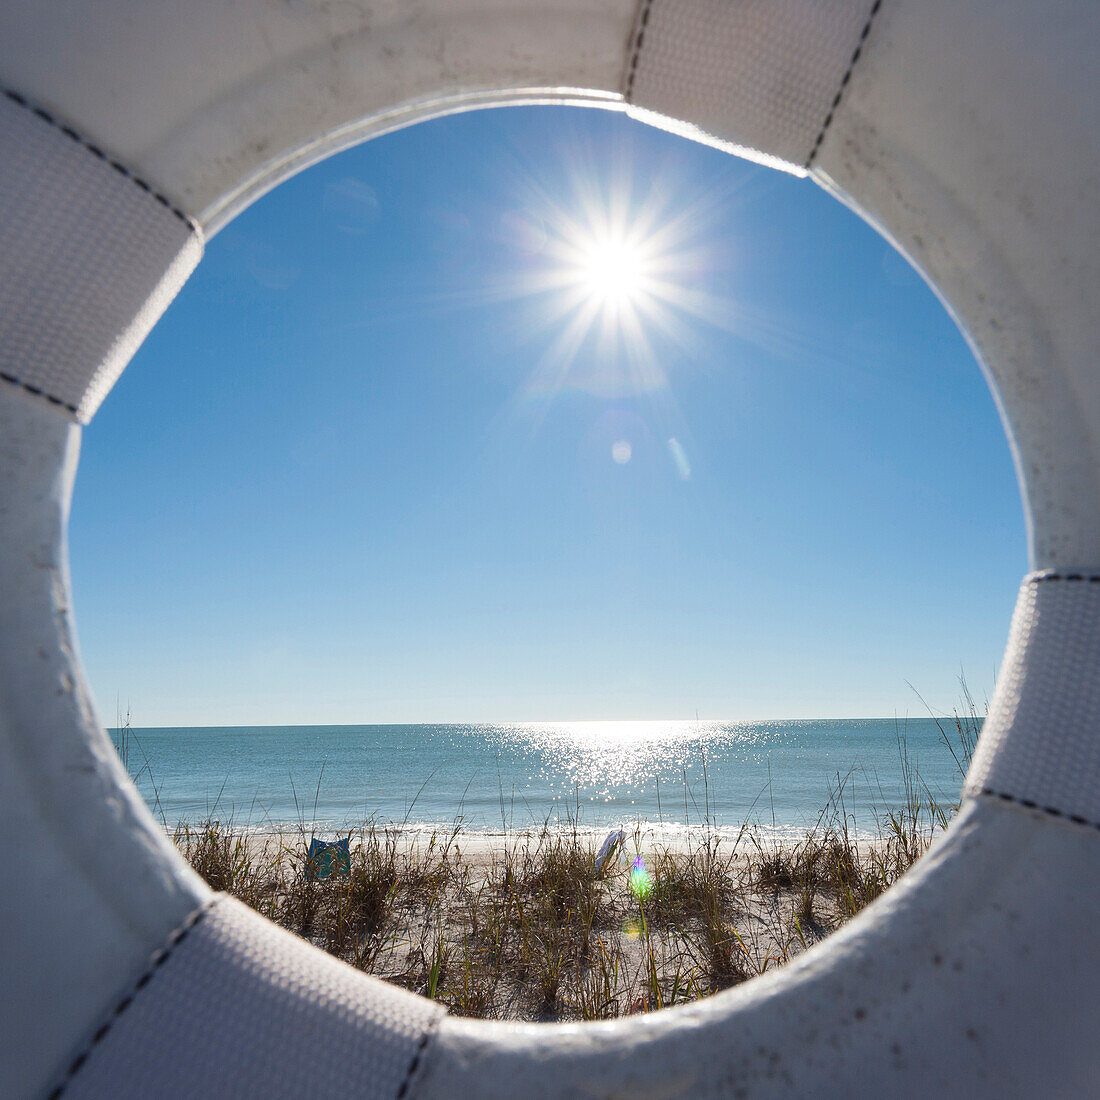 View through a lifebelt at a lonesome beach during sunshine at the golf of Mexico, Naples, Florida, USA